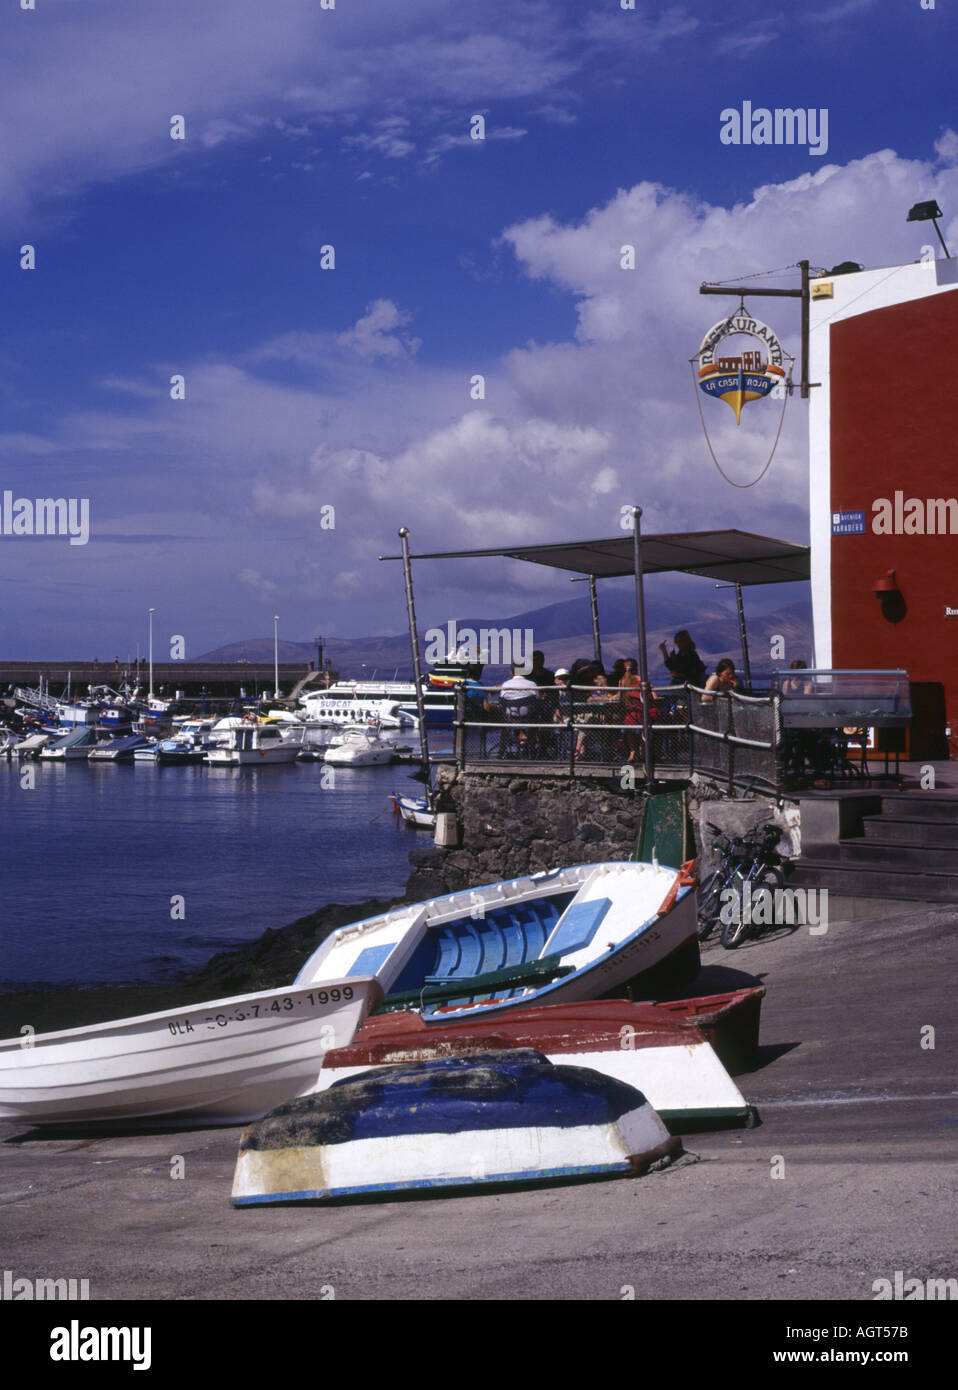 dh  PUERTO DEL CARMEN LANZAROTE Small boats on slipway tourists eating out balcony harbour restaurant cafe Stock Photo